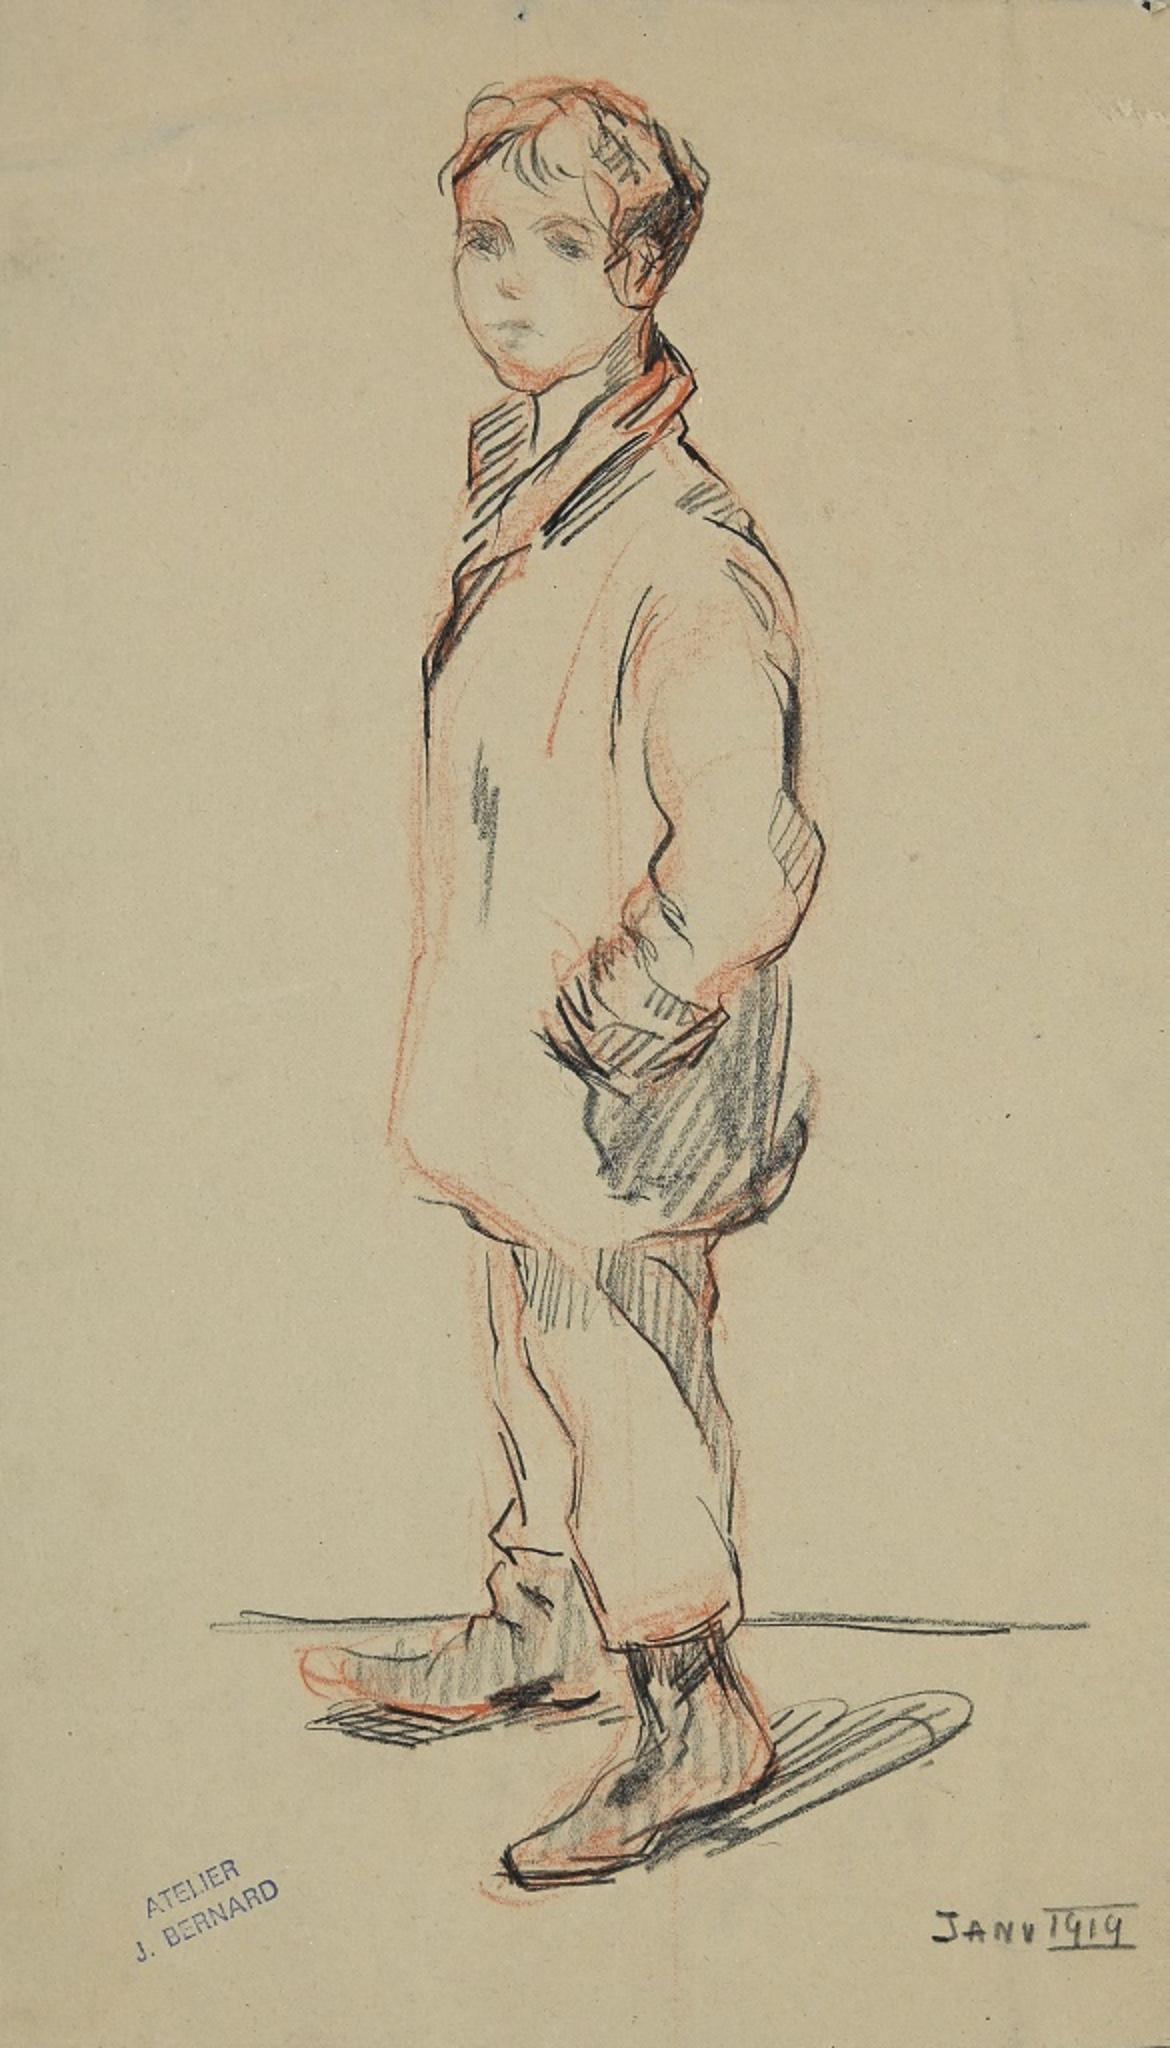 Figure of a boy is a beautiful pensil drawing and pastel realized by Jean Bernard on 1914.

The artwork is in good contitions, with a little stamp of the atelier on the lower left corner.

The drawing is on a brown paper, glued on a grey card of the